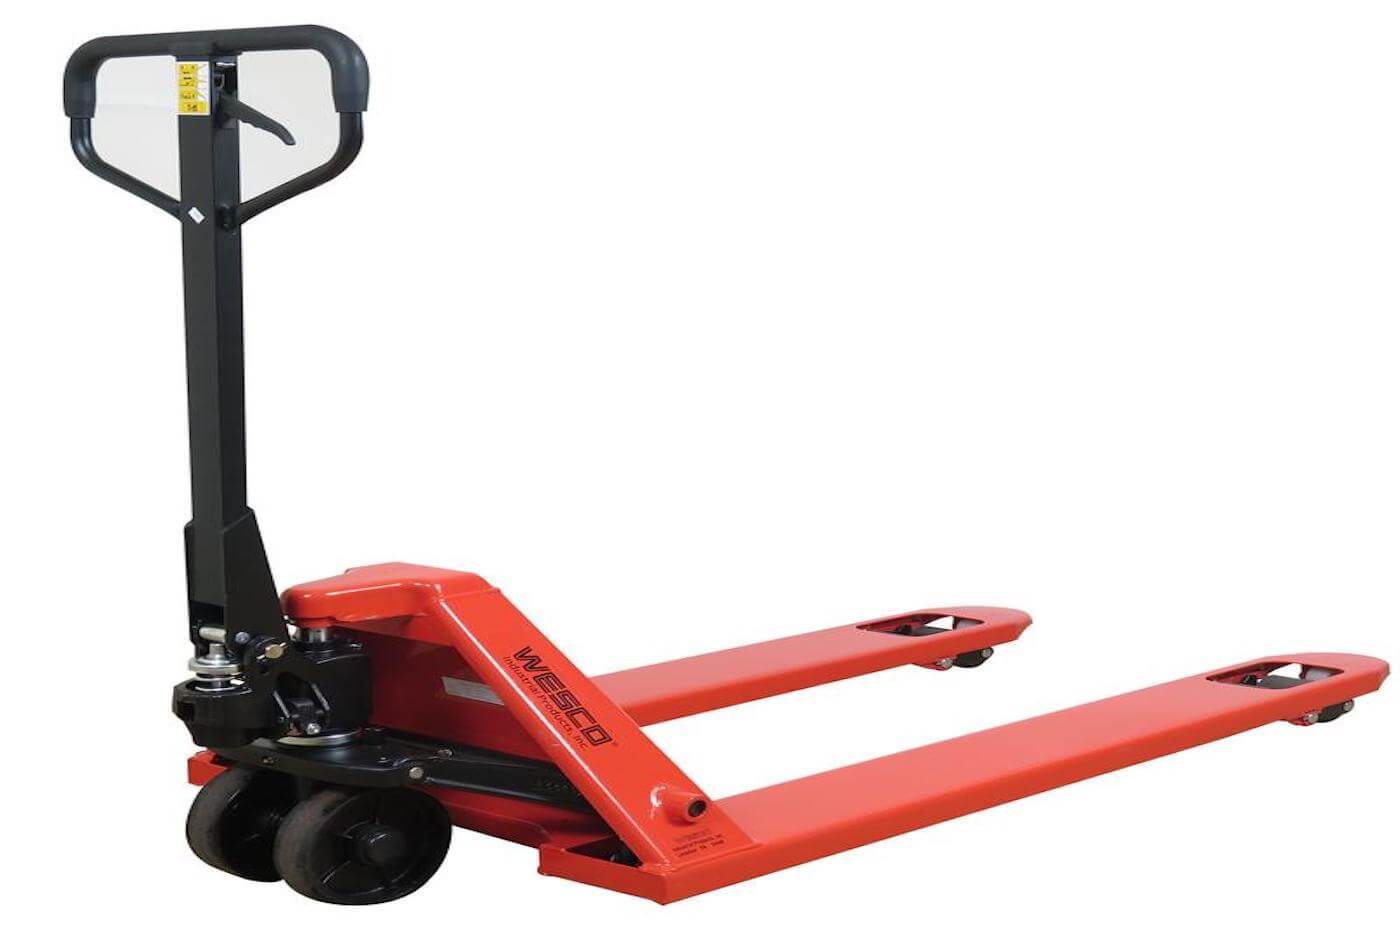 Pallet Jack Buyers Guide: Tips on Buying New & Used Pallet Jacks